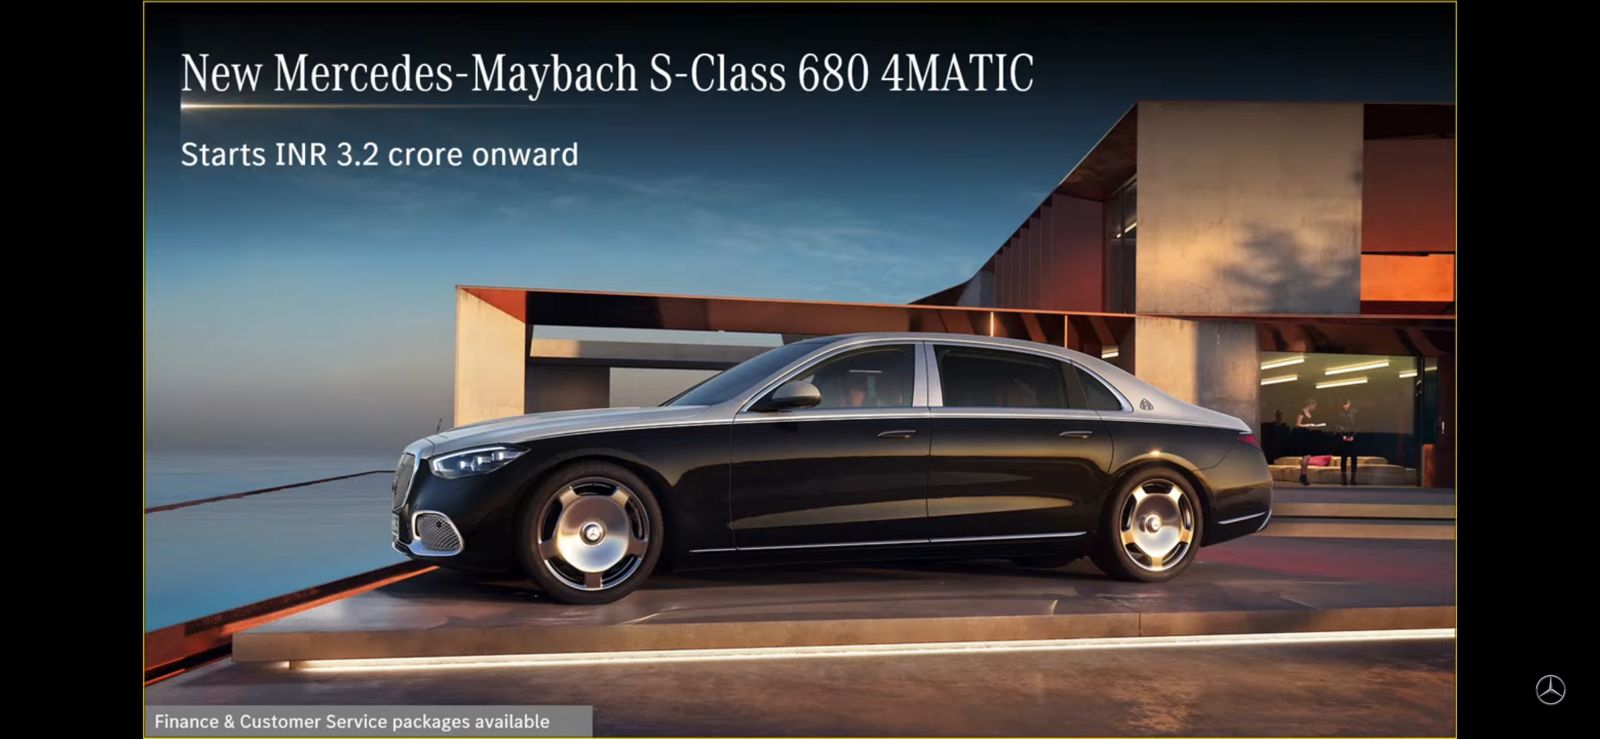 <p><font style="vertical-align: inherit;"><font style="vertical-align: inherit;">The Mercedes Maybach S680 is priced at Rs 3.2 crore</font></font></p>